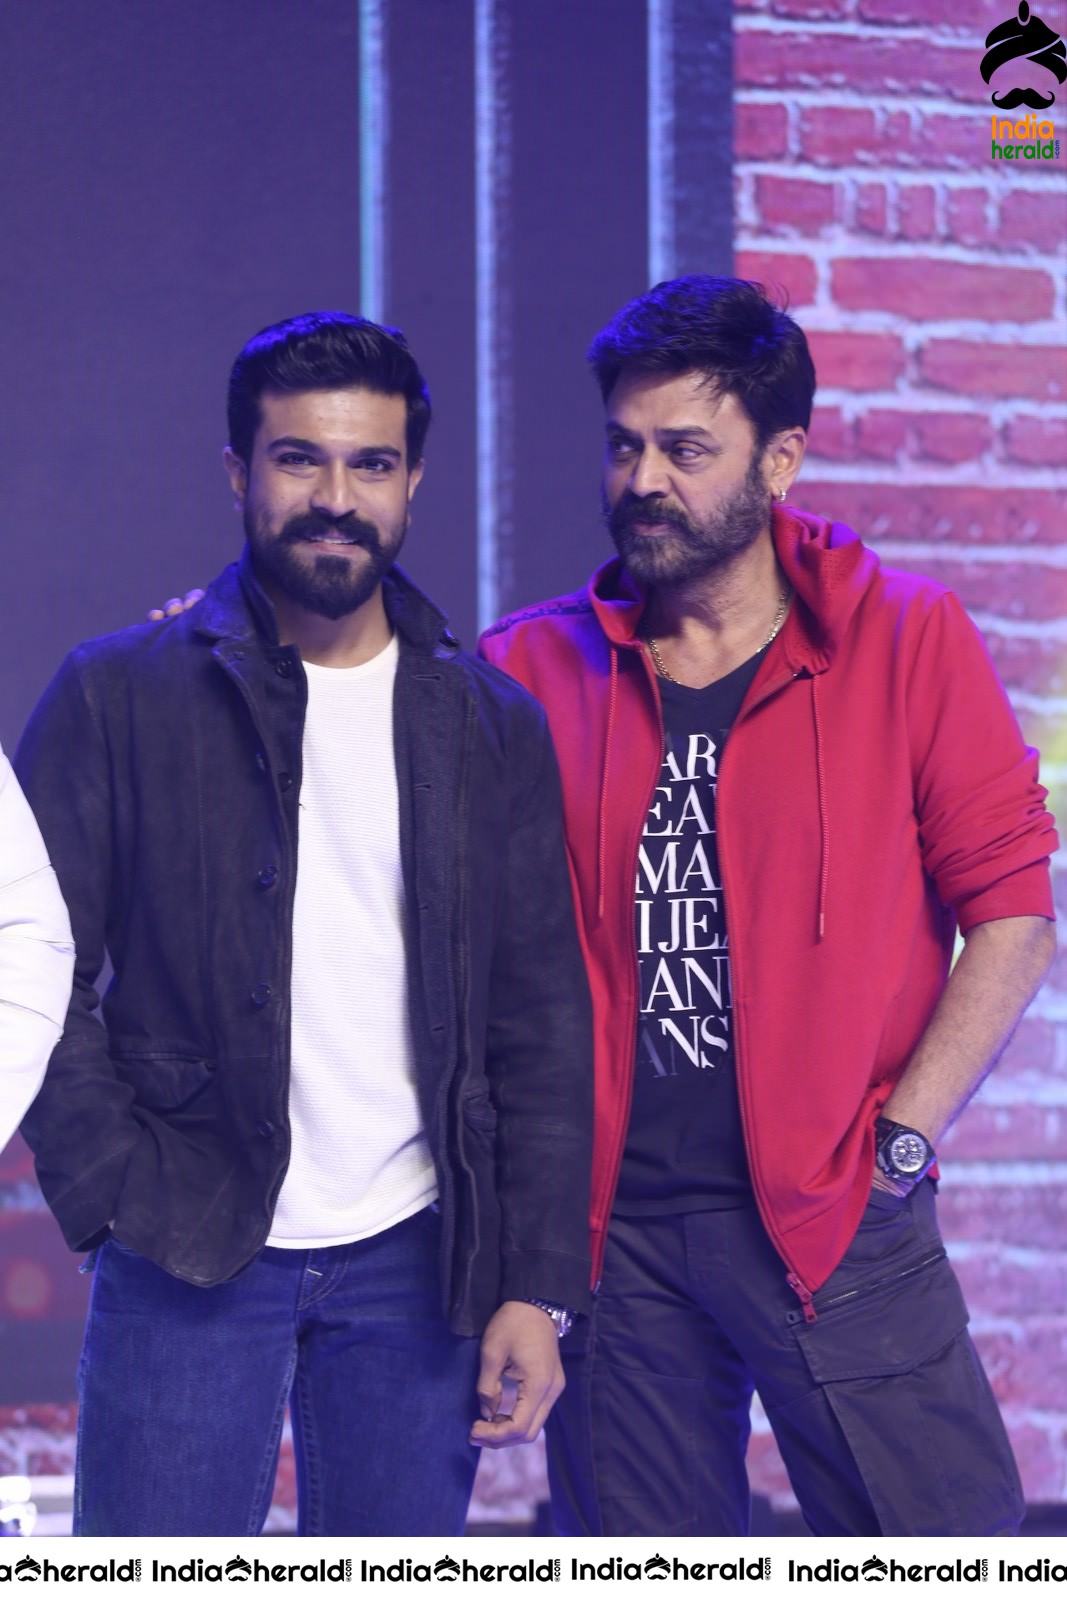 Actors Ram Charan and Venkatesh Seen Together On the Stage Set 1